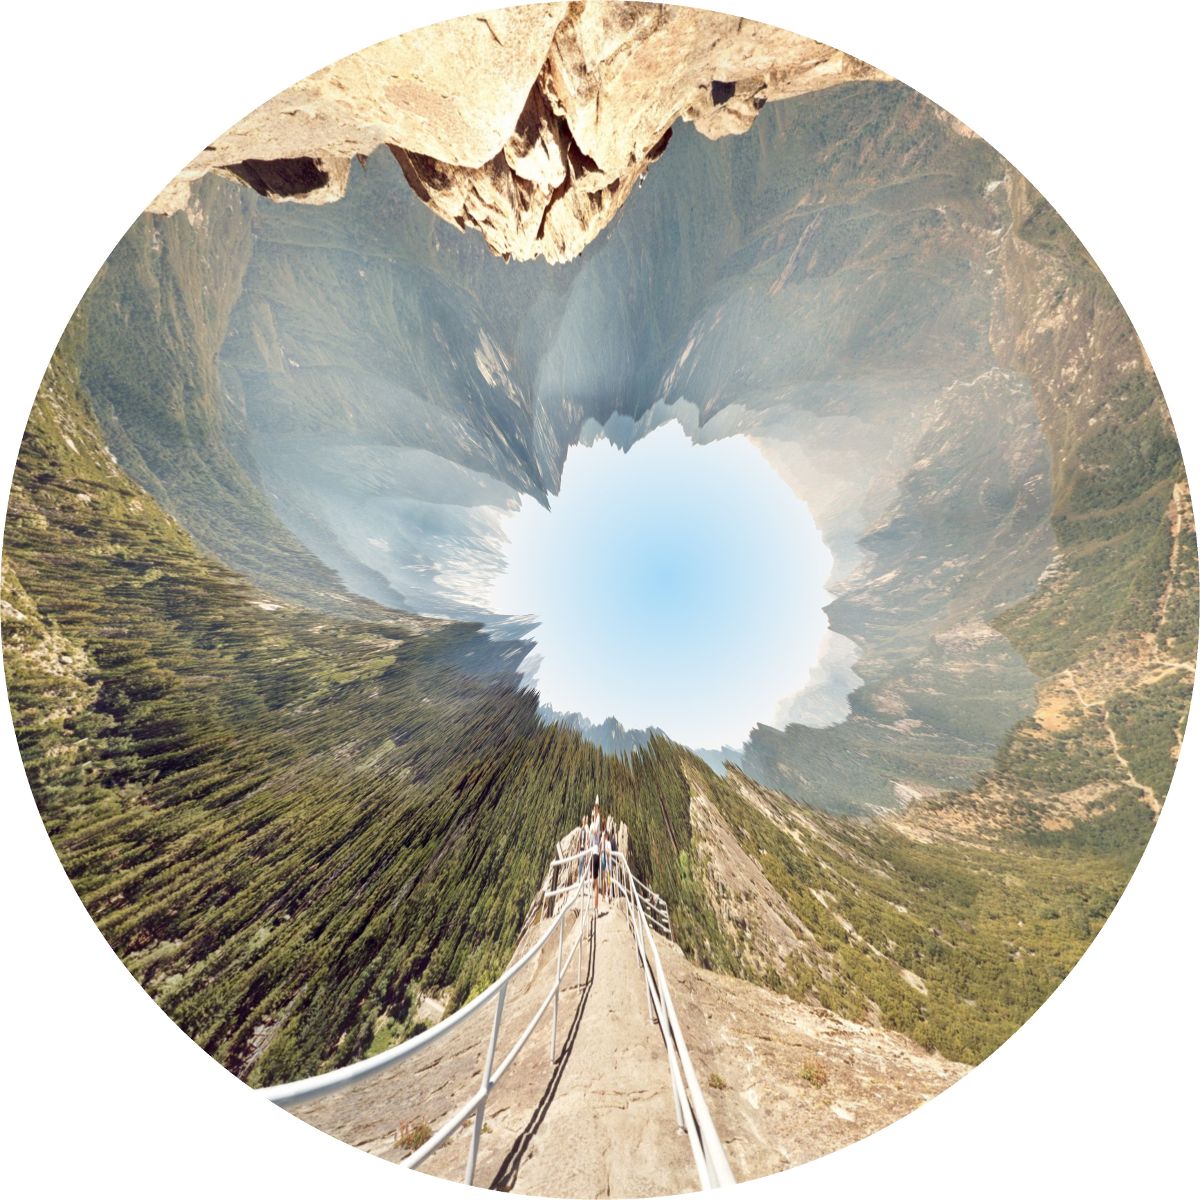 360 view from Moro Rock, Giant Sequoia National Park, California, USA (2002) | Title: Moro Hole | Author: Henning Leweke | Source: Flickr | License: CC BY-SA 2.0